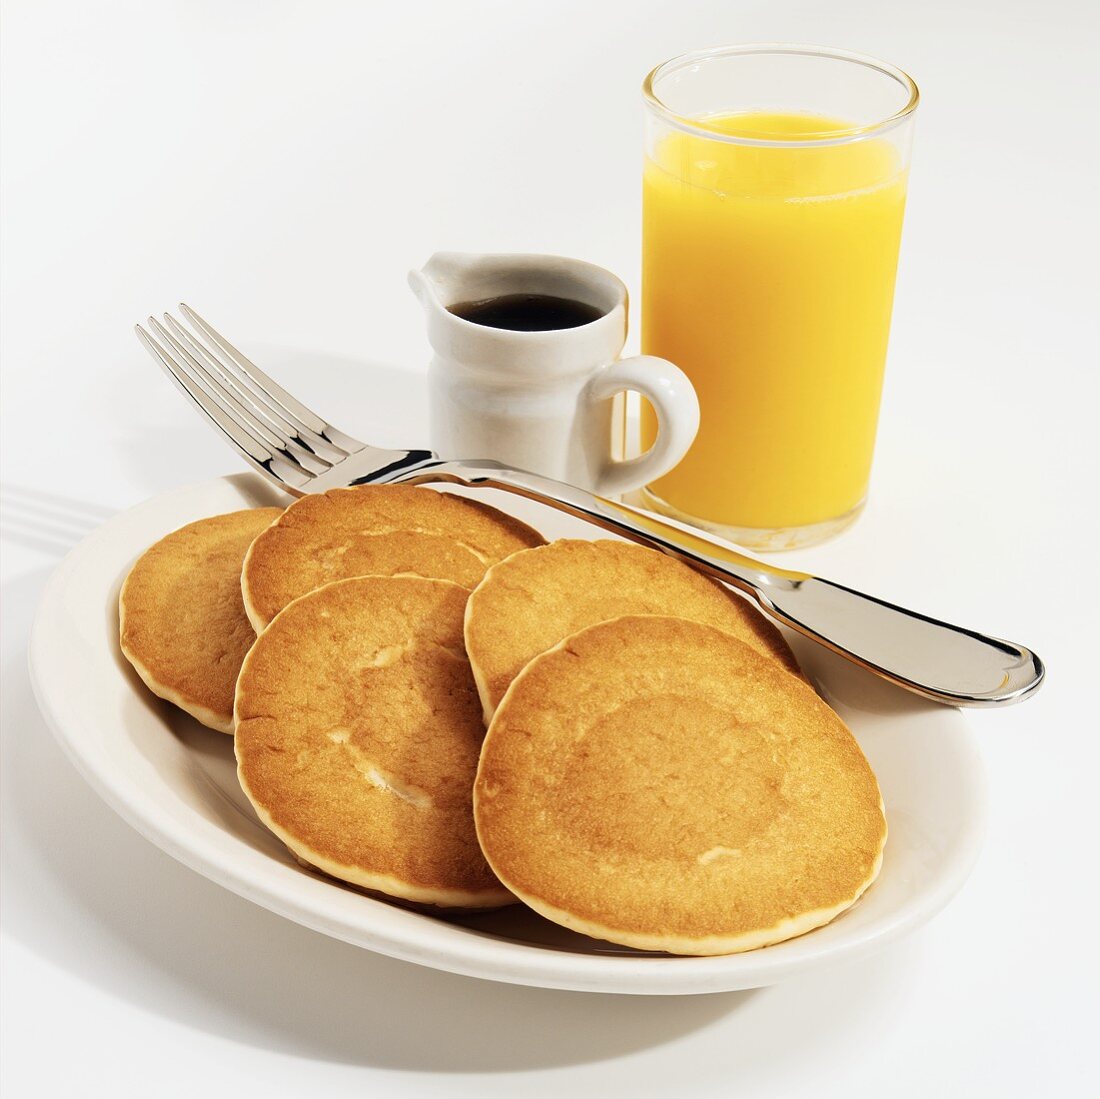 Five Pancakes on a White Plate with a Fork, a Pitcher of Maple Syrup and Orange Juice